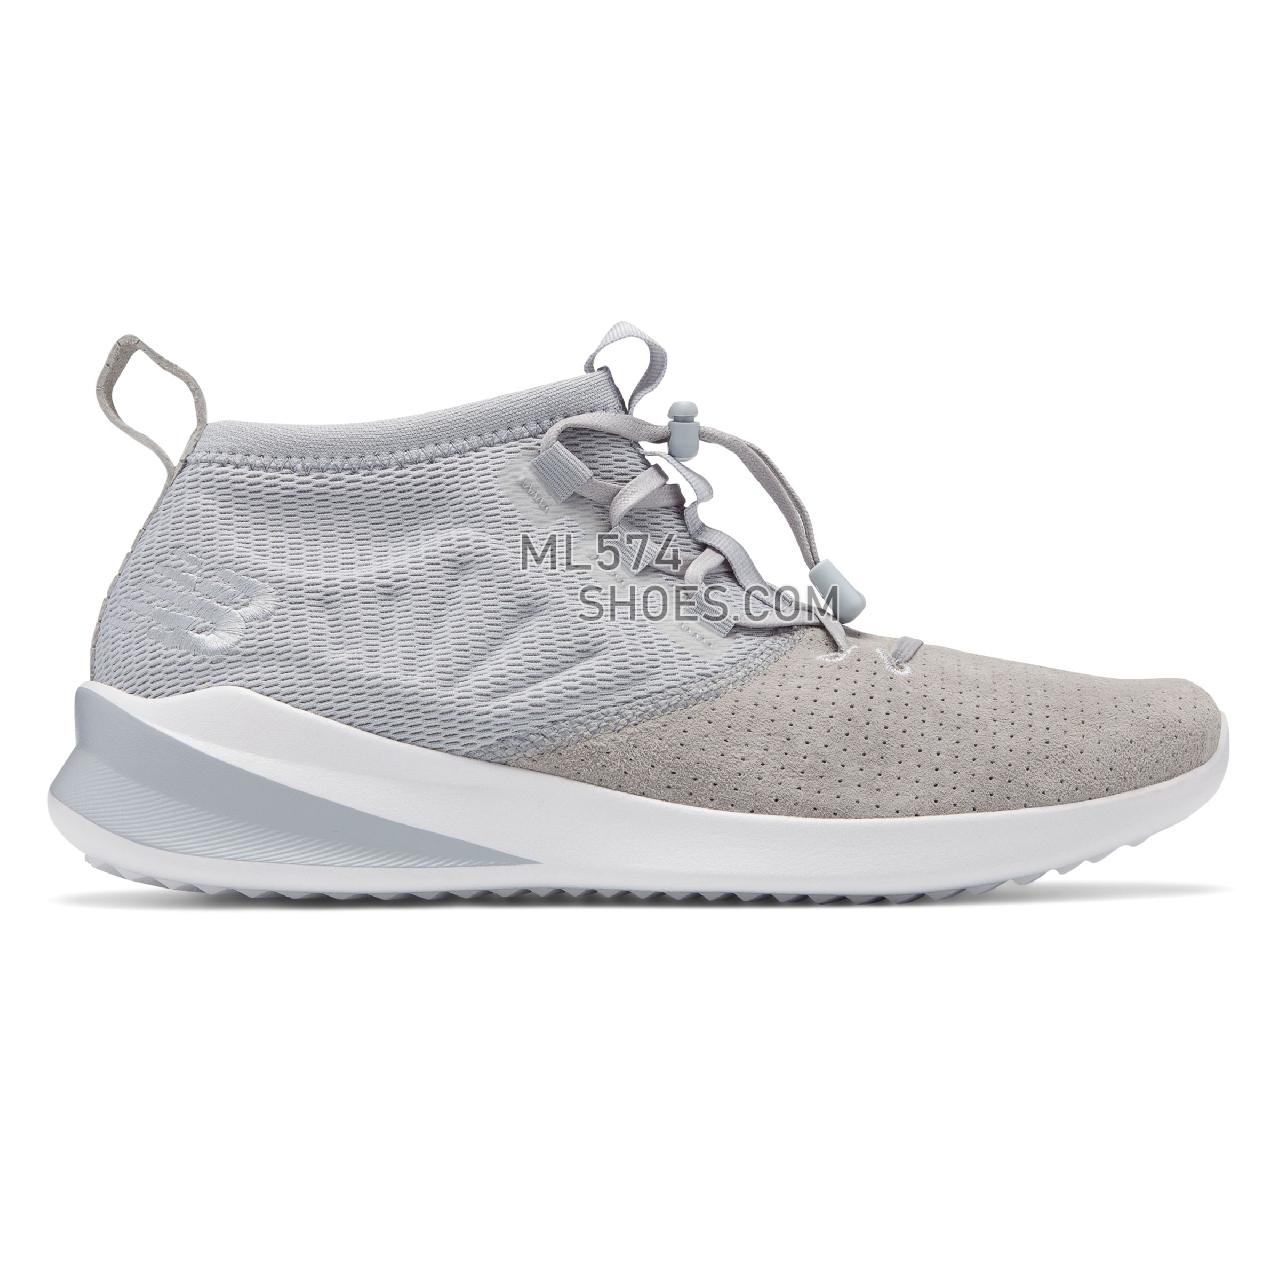 New Balance Cypher Run Luxe - Men's  - Running Silver Mink with White - MSRMCLS